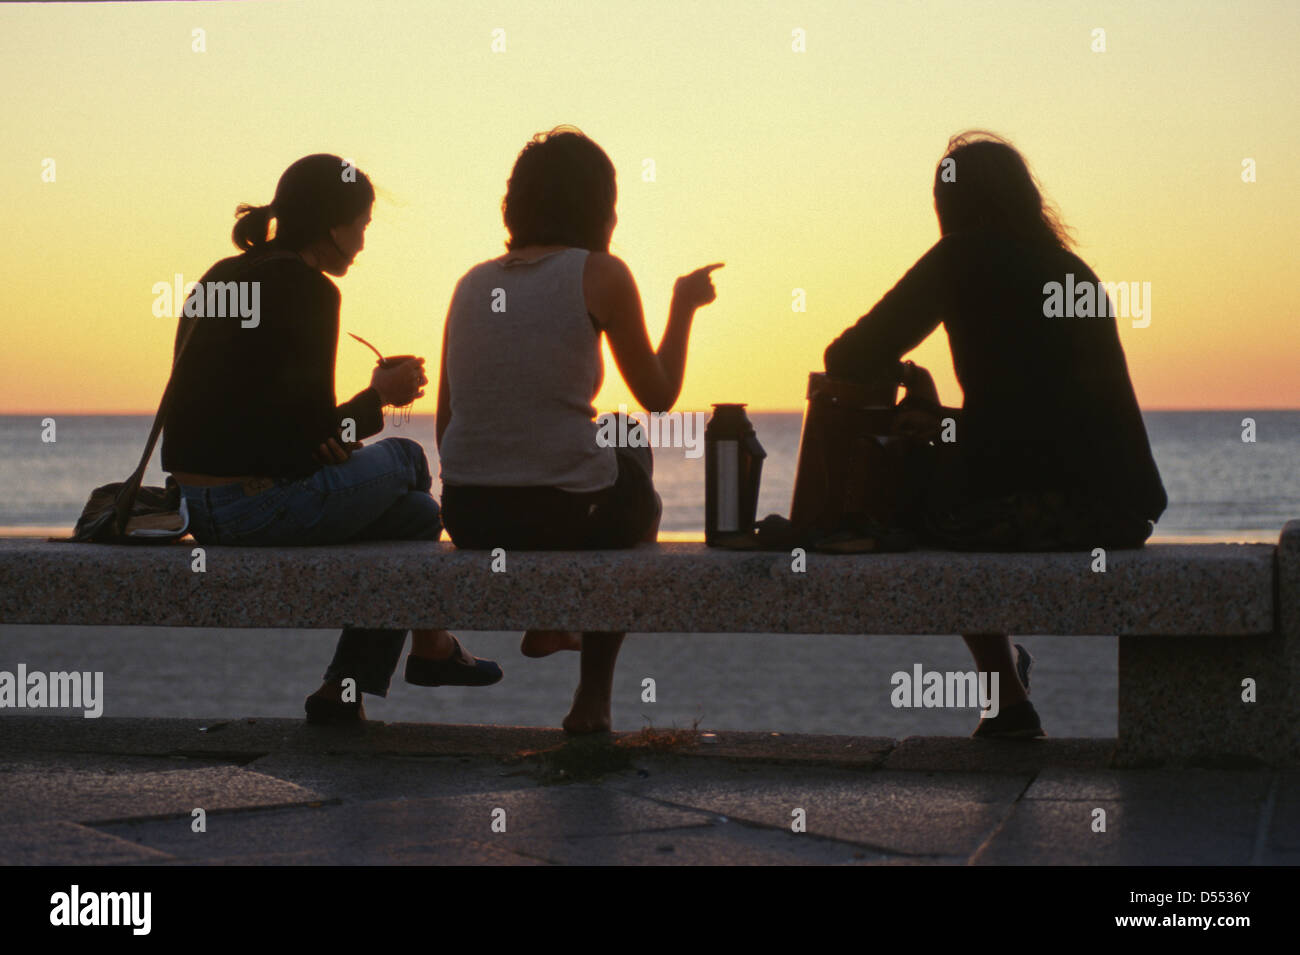 Young women sipping mate drink from gourds at sunset in Montevideo, Uruguay Stock Photo